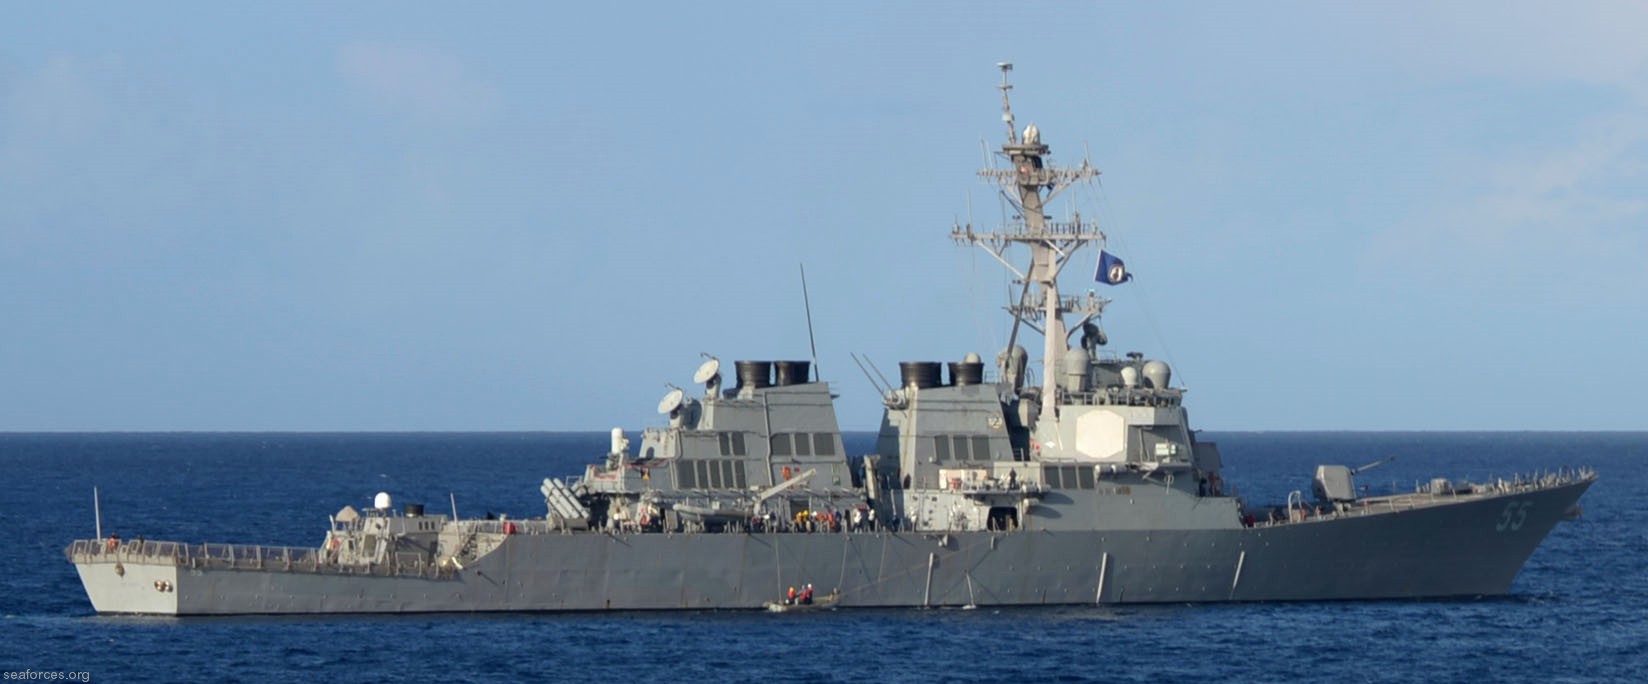 ddg-55 uss stout guided missile destroyer us navy 26